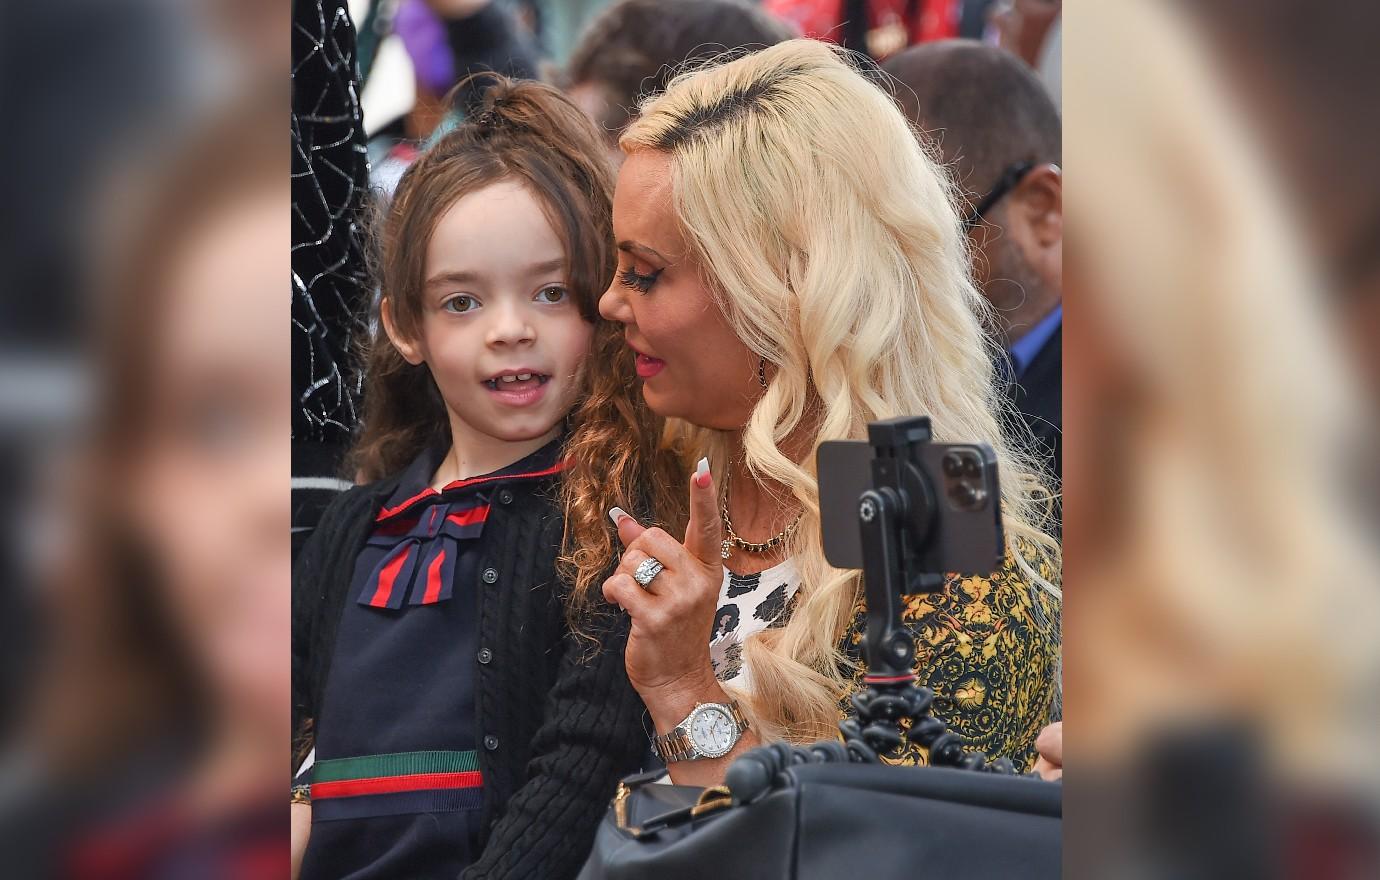 Coco Austin Under Fire For 'Creepy' Video Kissing Daughter On Lips